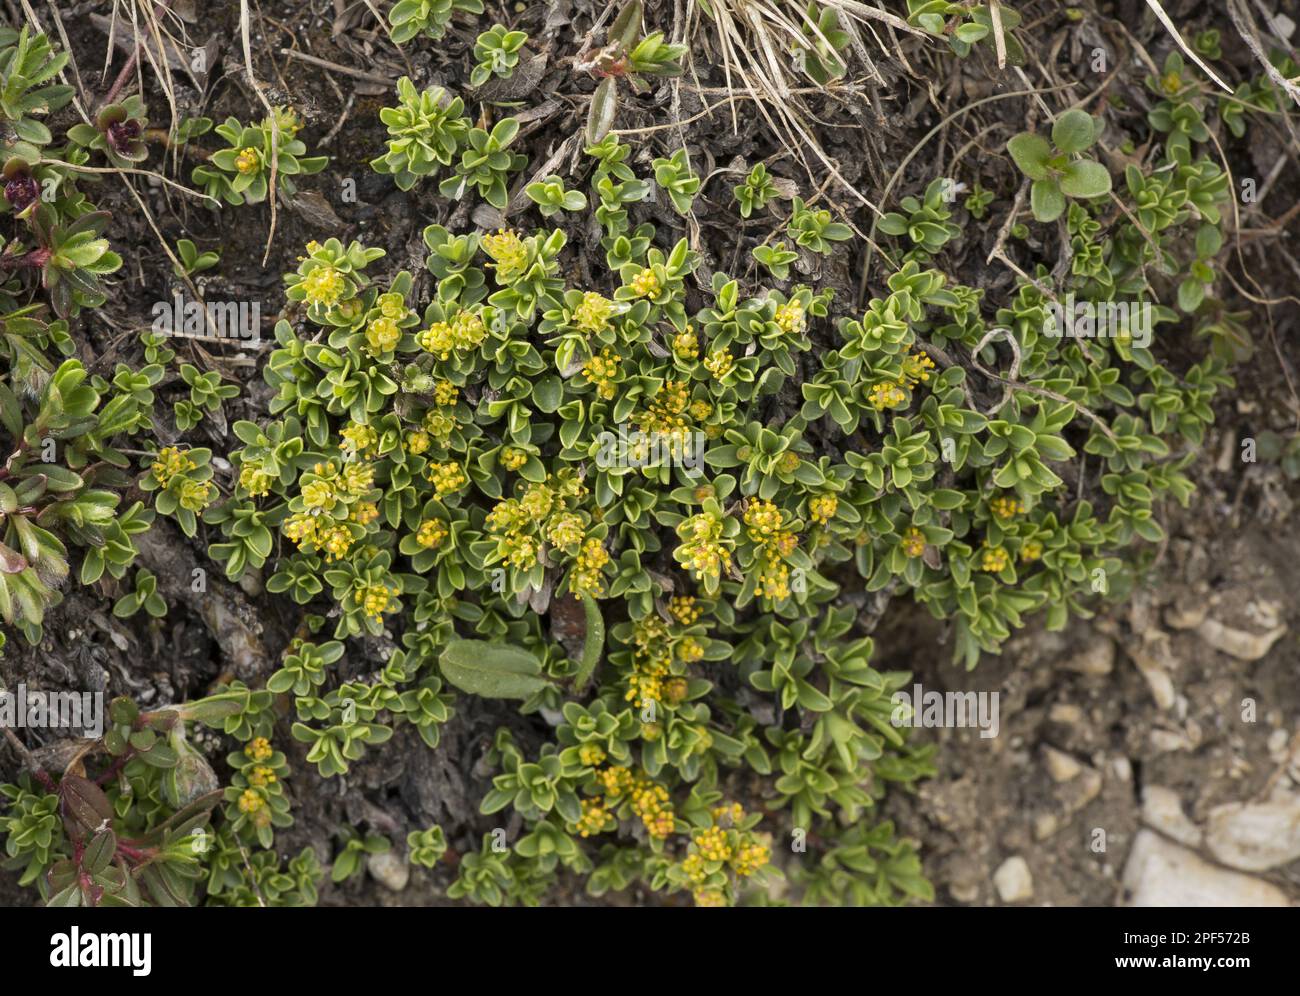 Thyme-leaved willow, Thyme-leaved dwarf willow, Thyme-leaved willow, Thyme-leaved dwarf willow, Thyme-leaved willow (Salix serpyllifolia) flowering Stock Photo